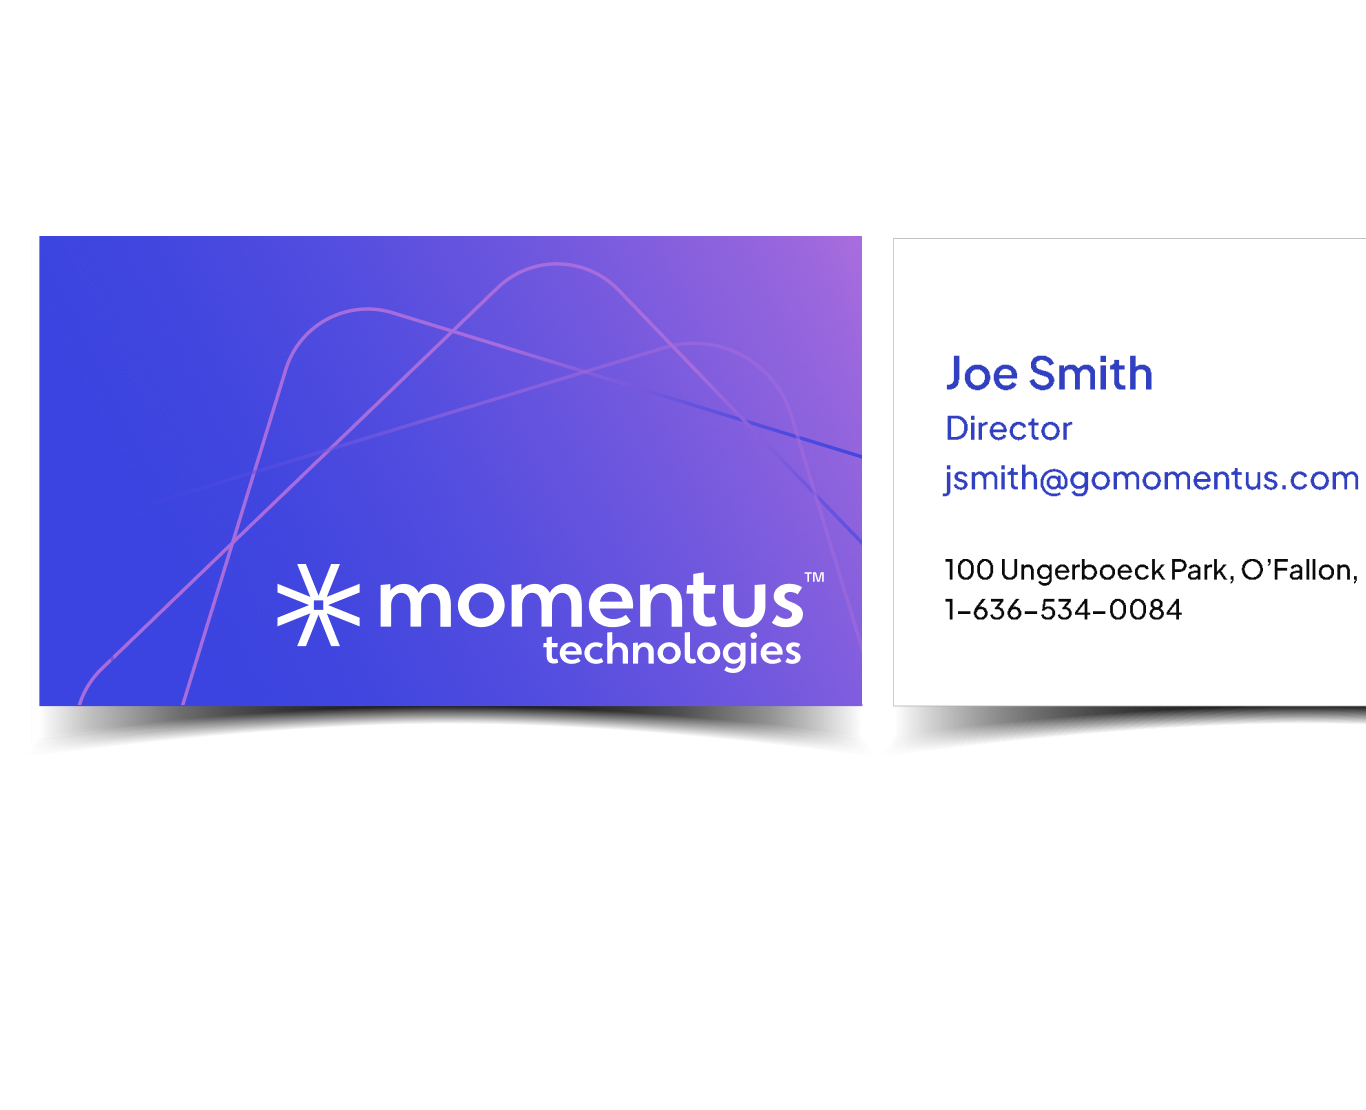 Momentus Technologies business cards front and back